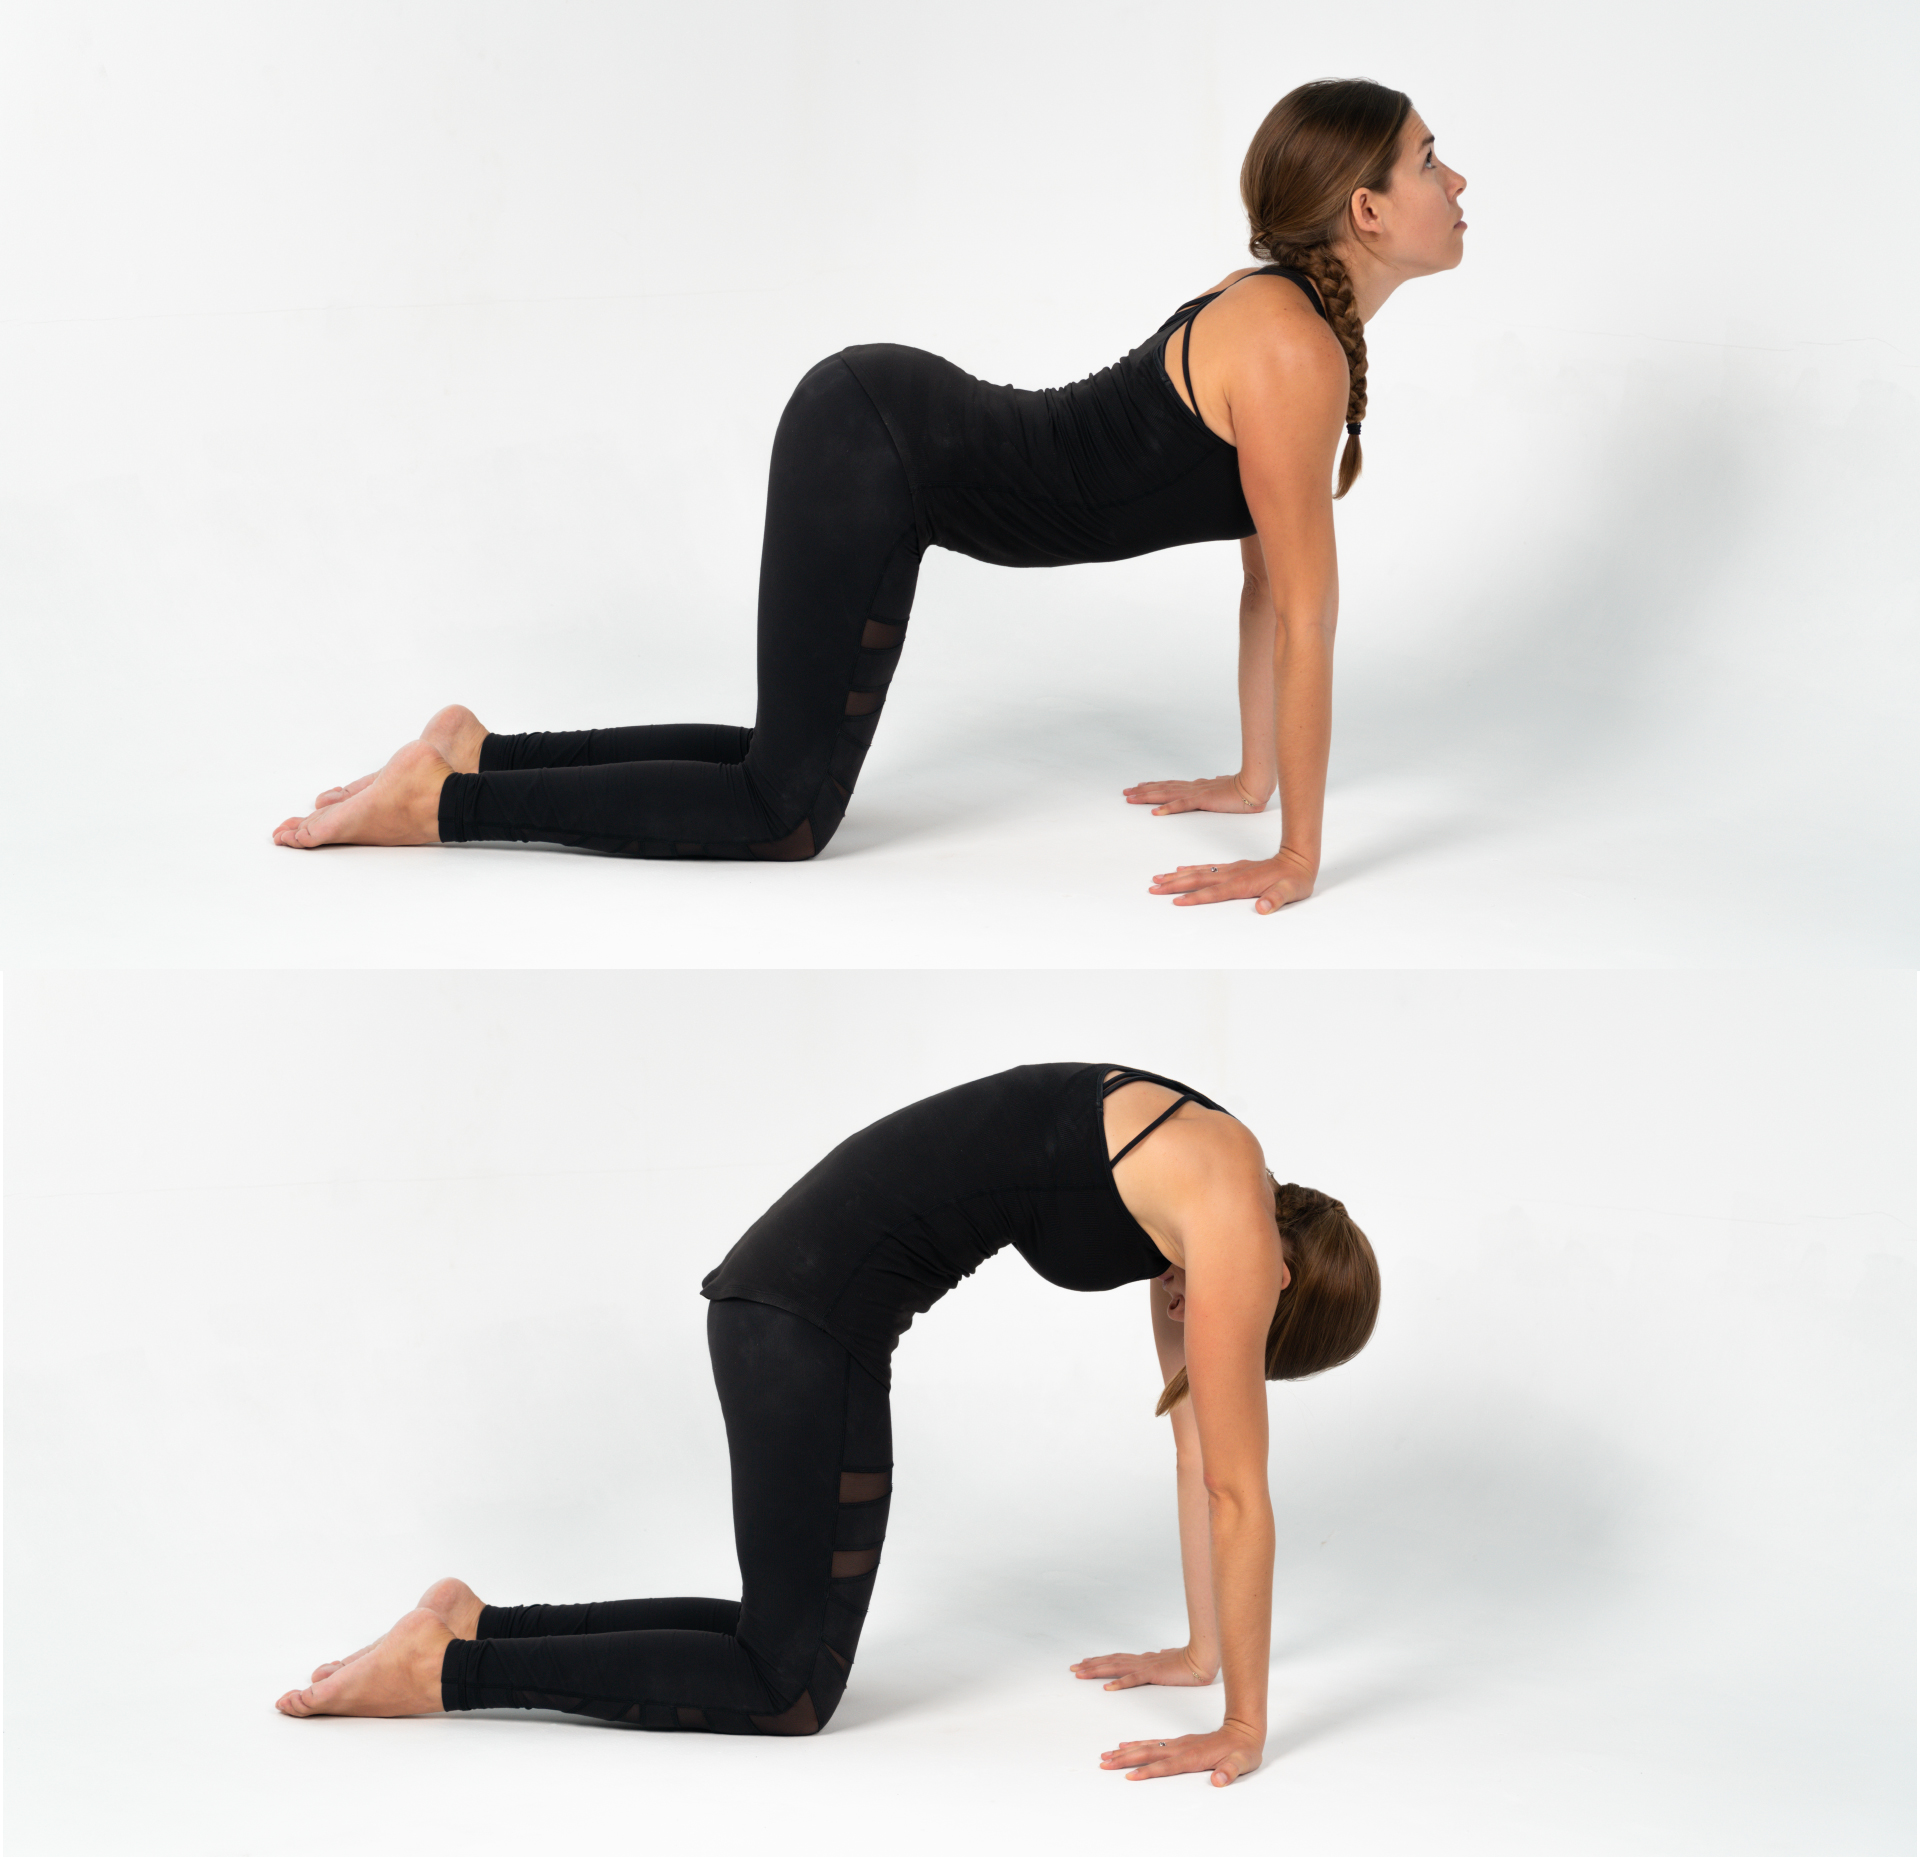 36 Difficult Hard Yoga Poses - More Challenging And Spicing!